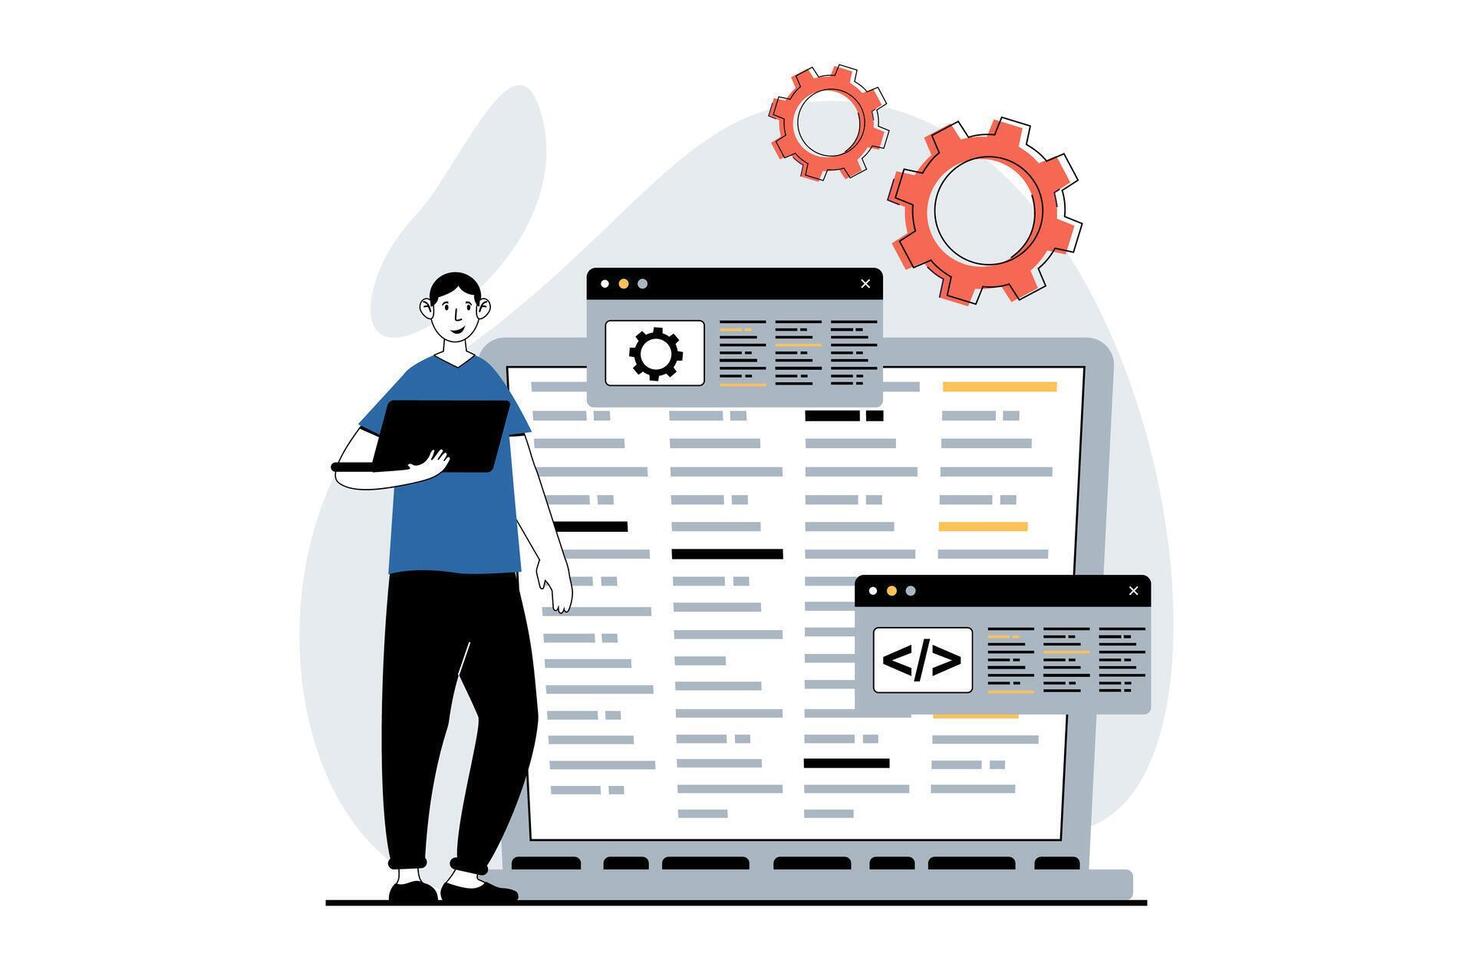 Software development concept with people scene in flat design for web. Man working with programming code, prototyping and engineering. Vector illustration for social media banner, marketing material.